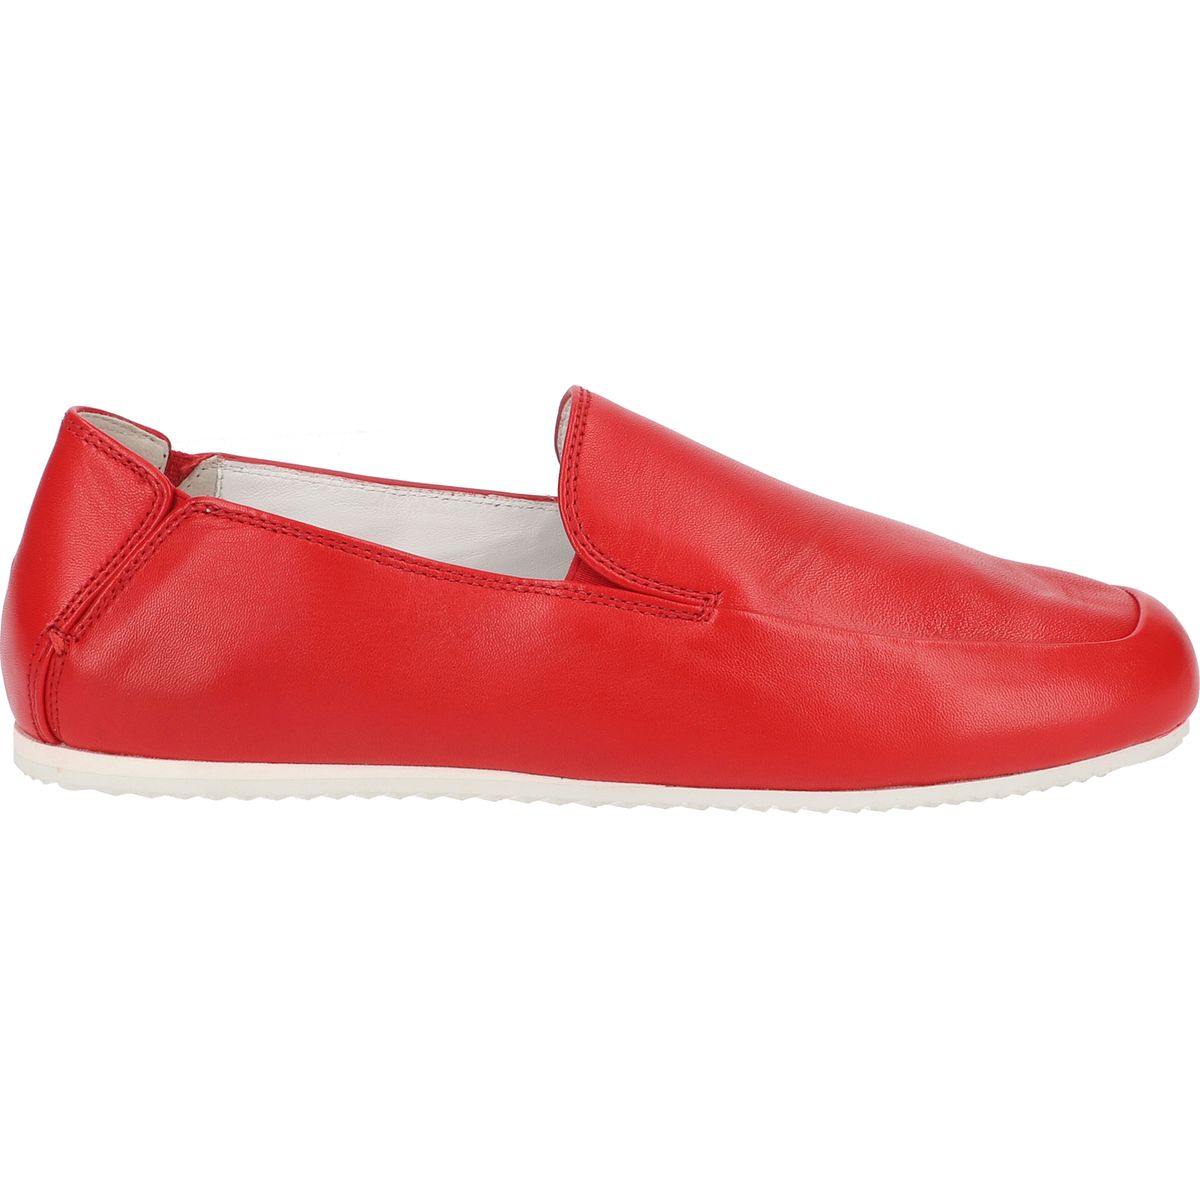 Hassia Babouche rouge style d\u00e9contract\u00e9 Chaussures Chaussures de travail Babouches 